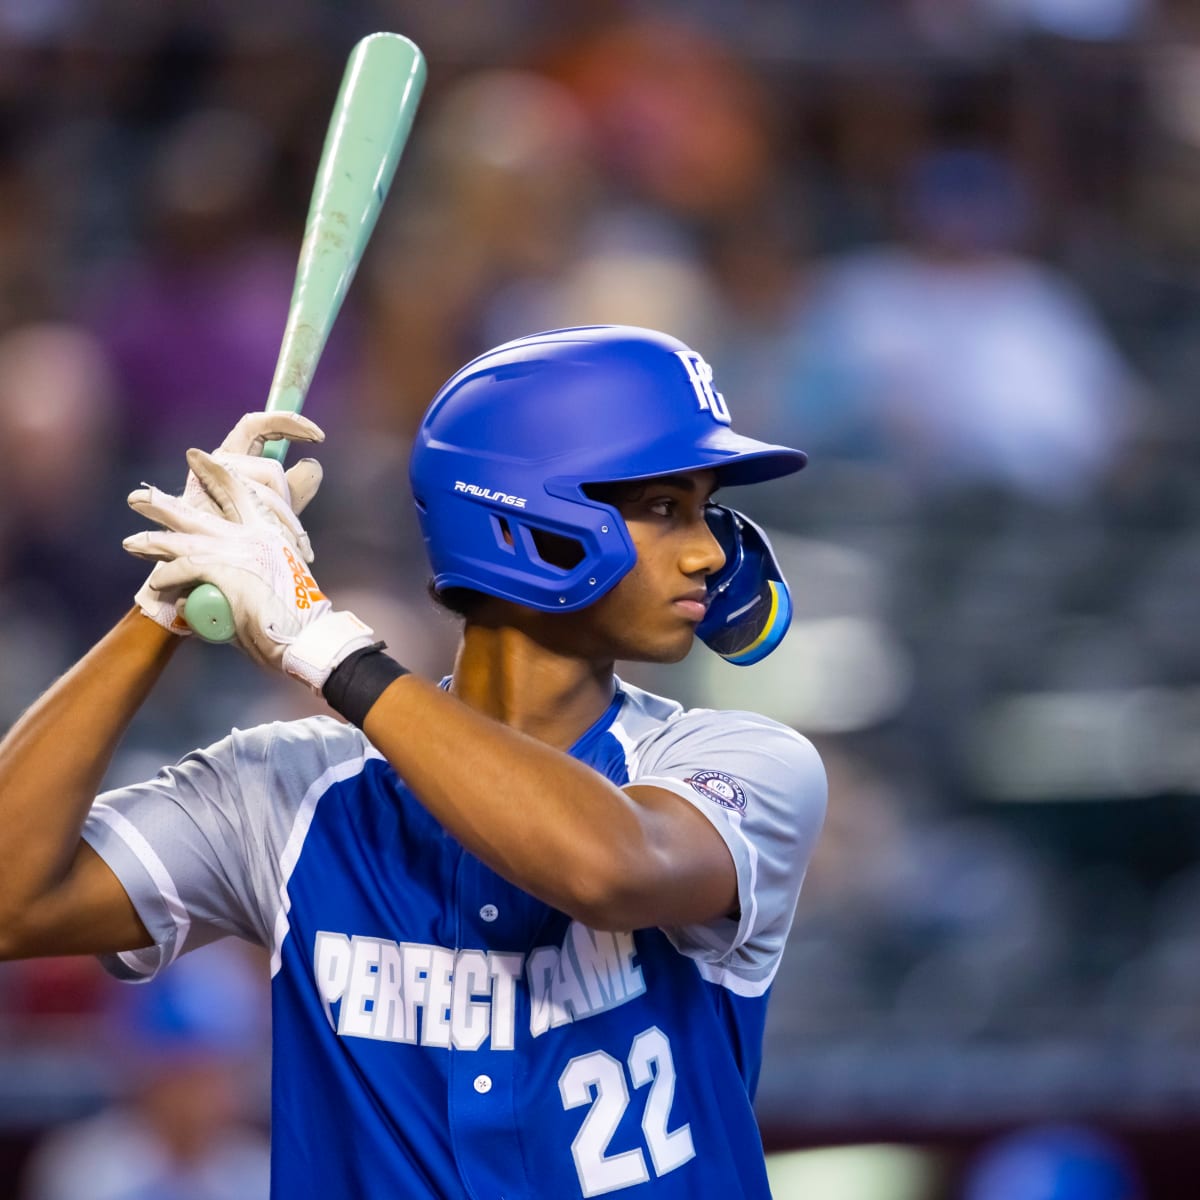 MLB Draft: Five players the Chicago Cubs could take in the first